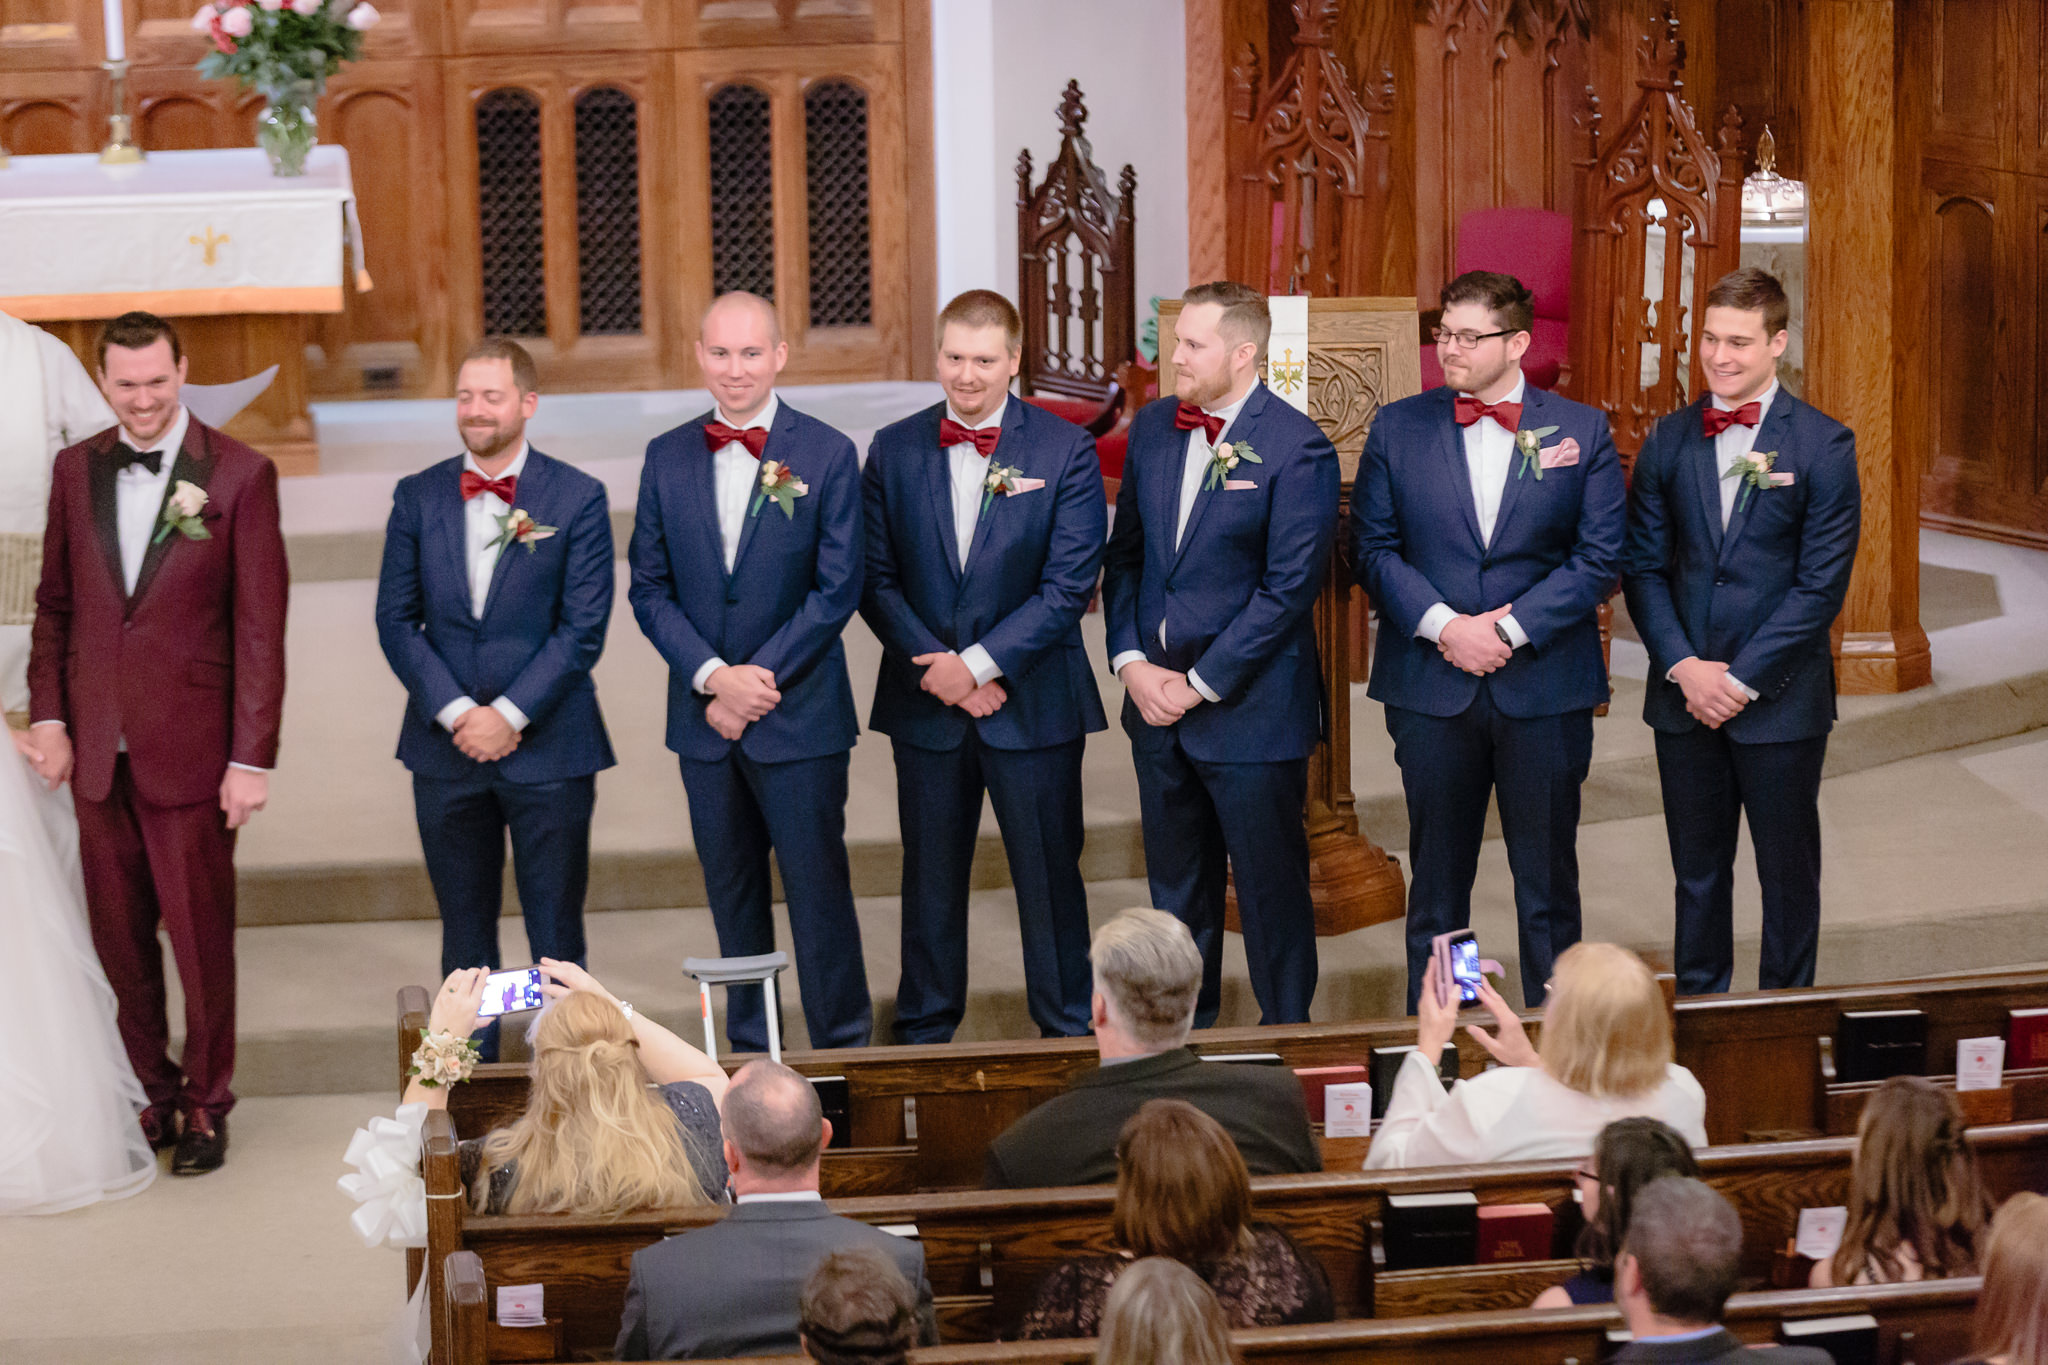 Groomsmen during a wedding ceremony at Smithfield United Church of Christ